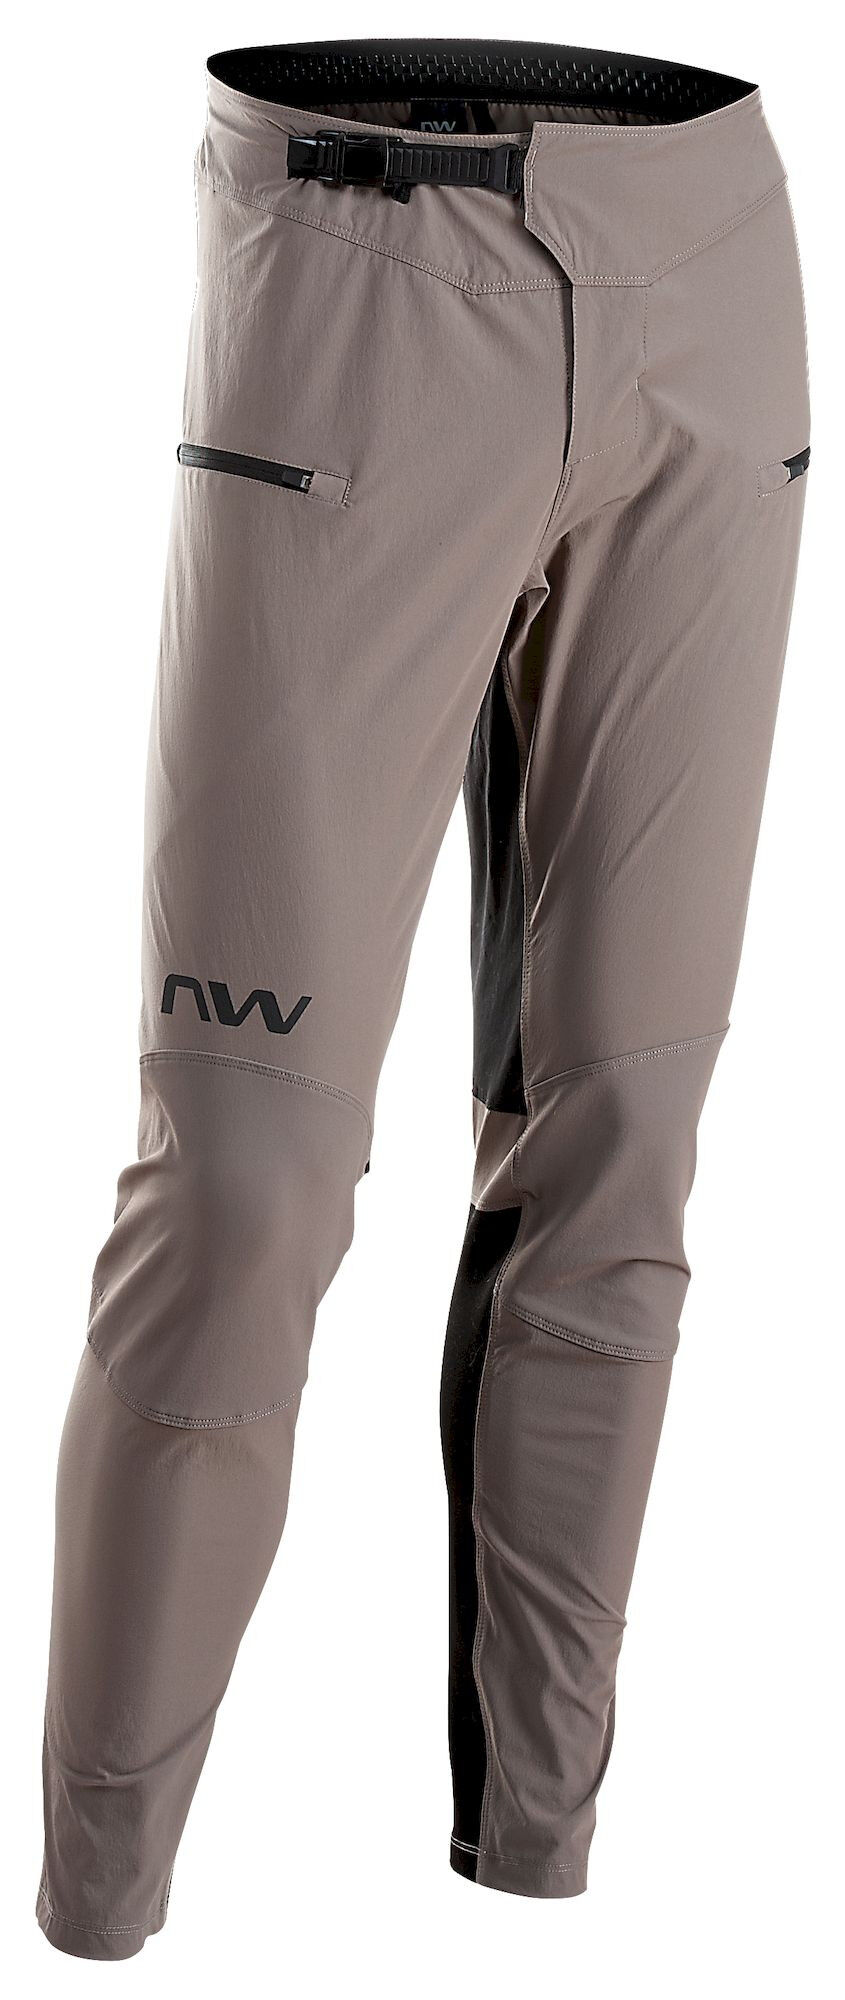 Northwave Bomb Pants - Cycling trousers - Men's